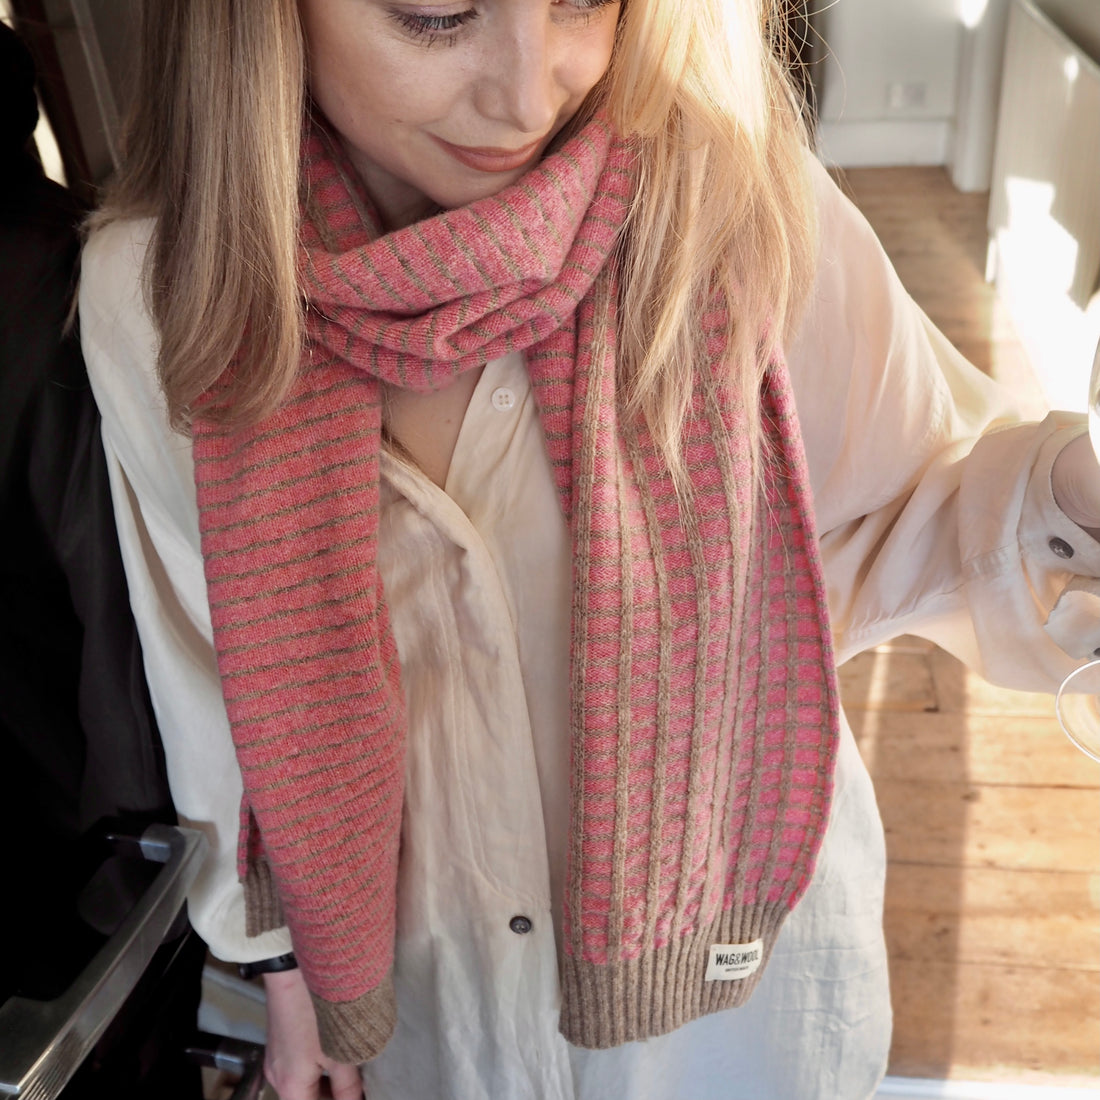 lady in a pink knitted scarf